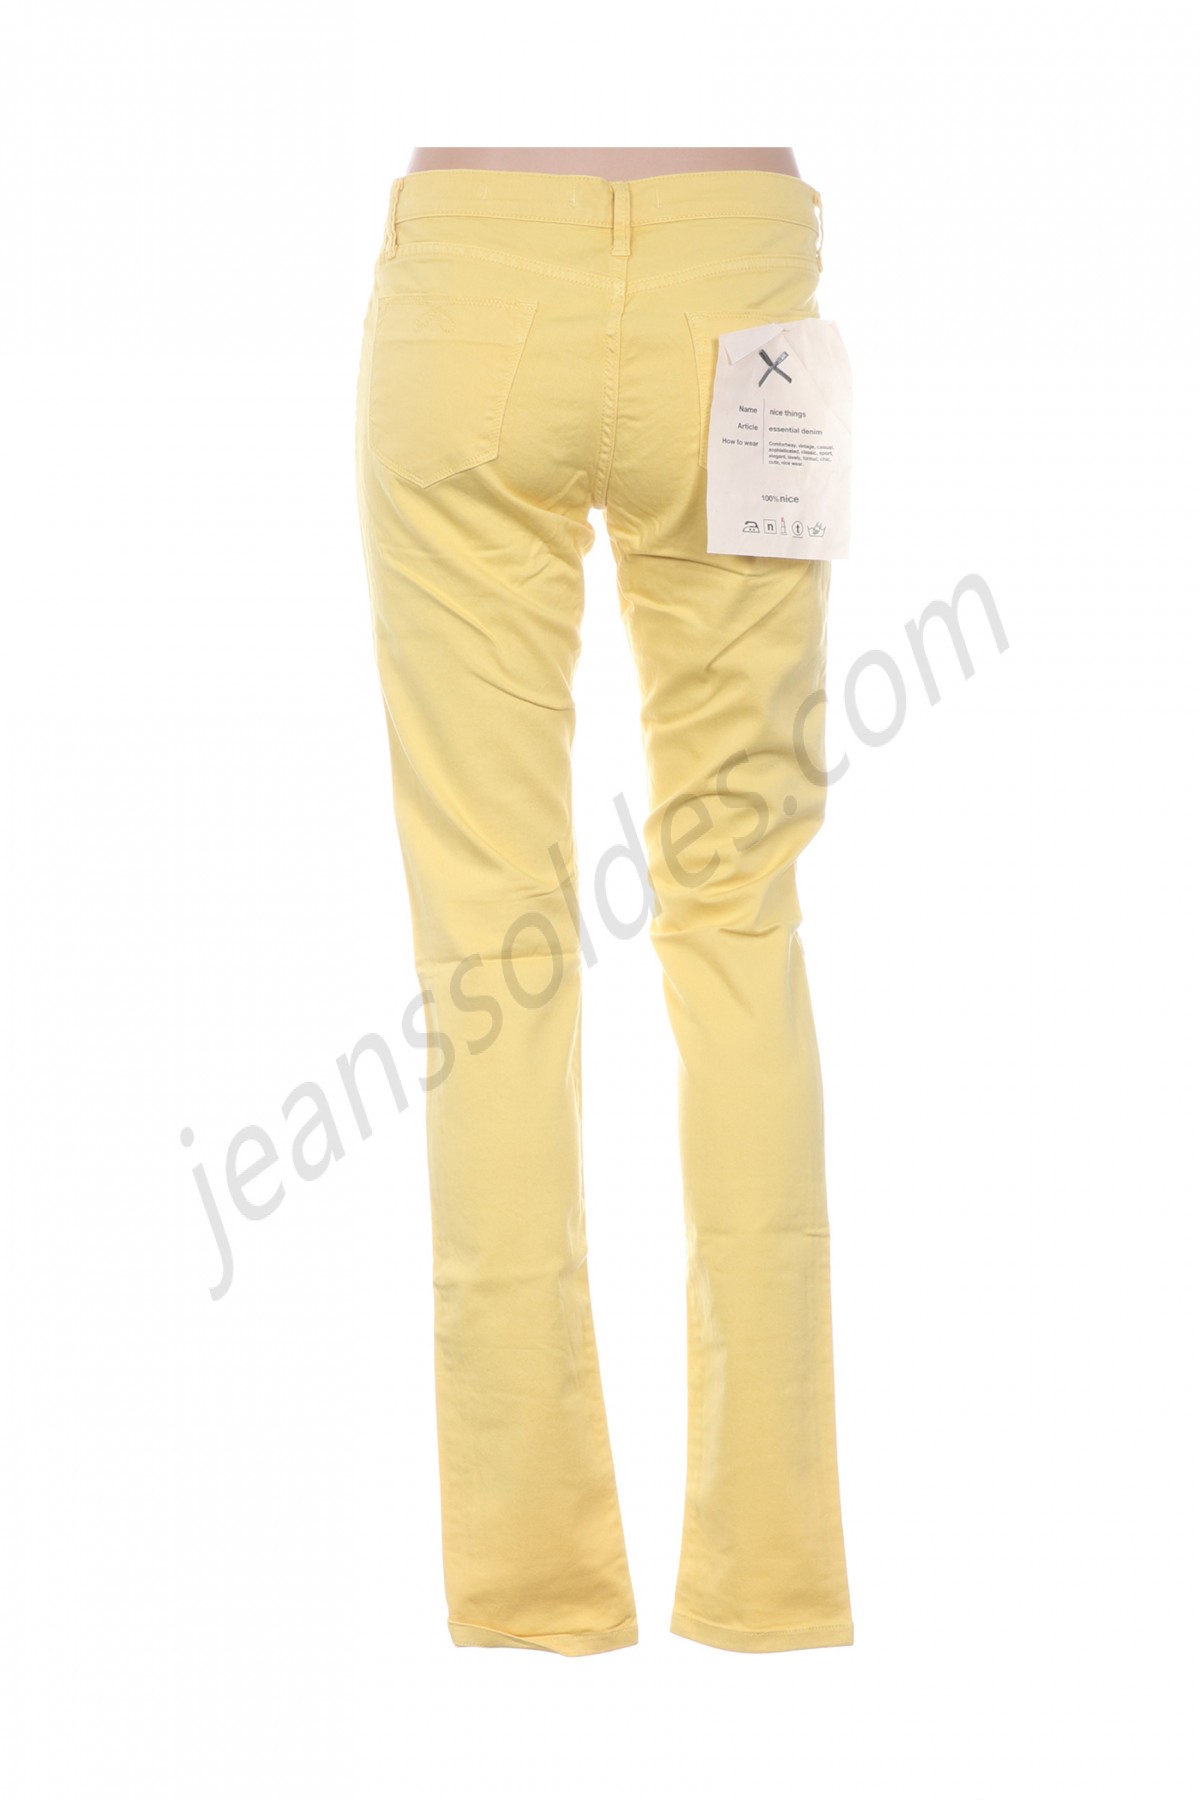 nice things-Jeans coupe slim prix d’amis - -1